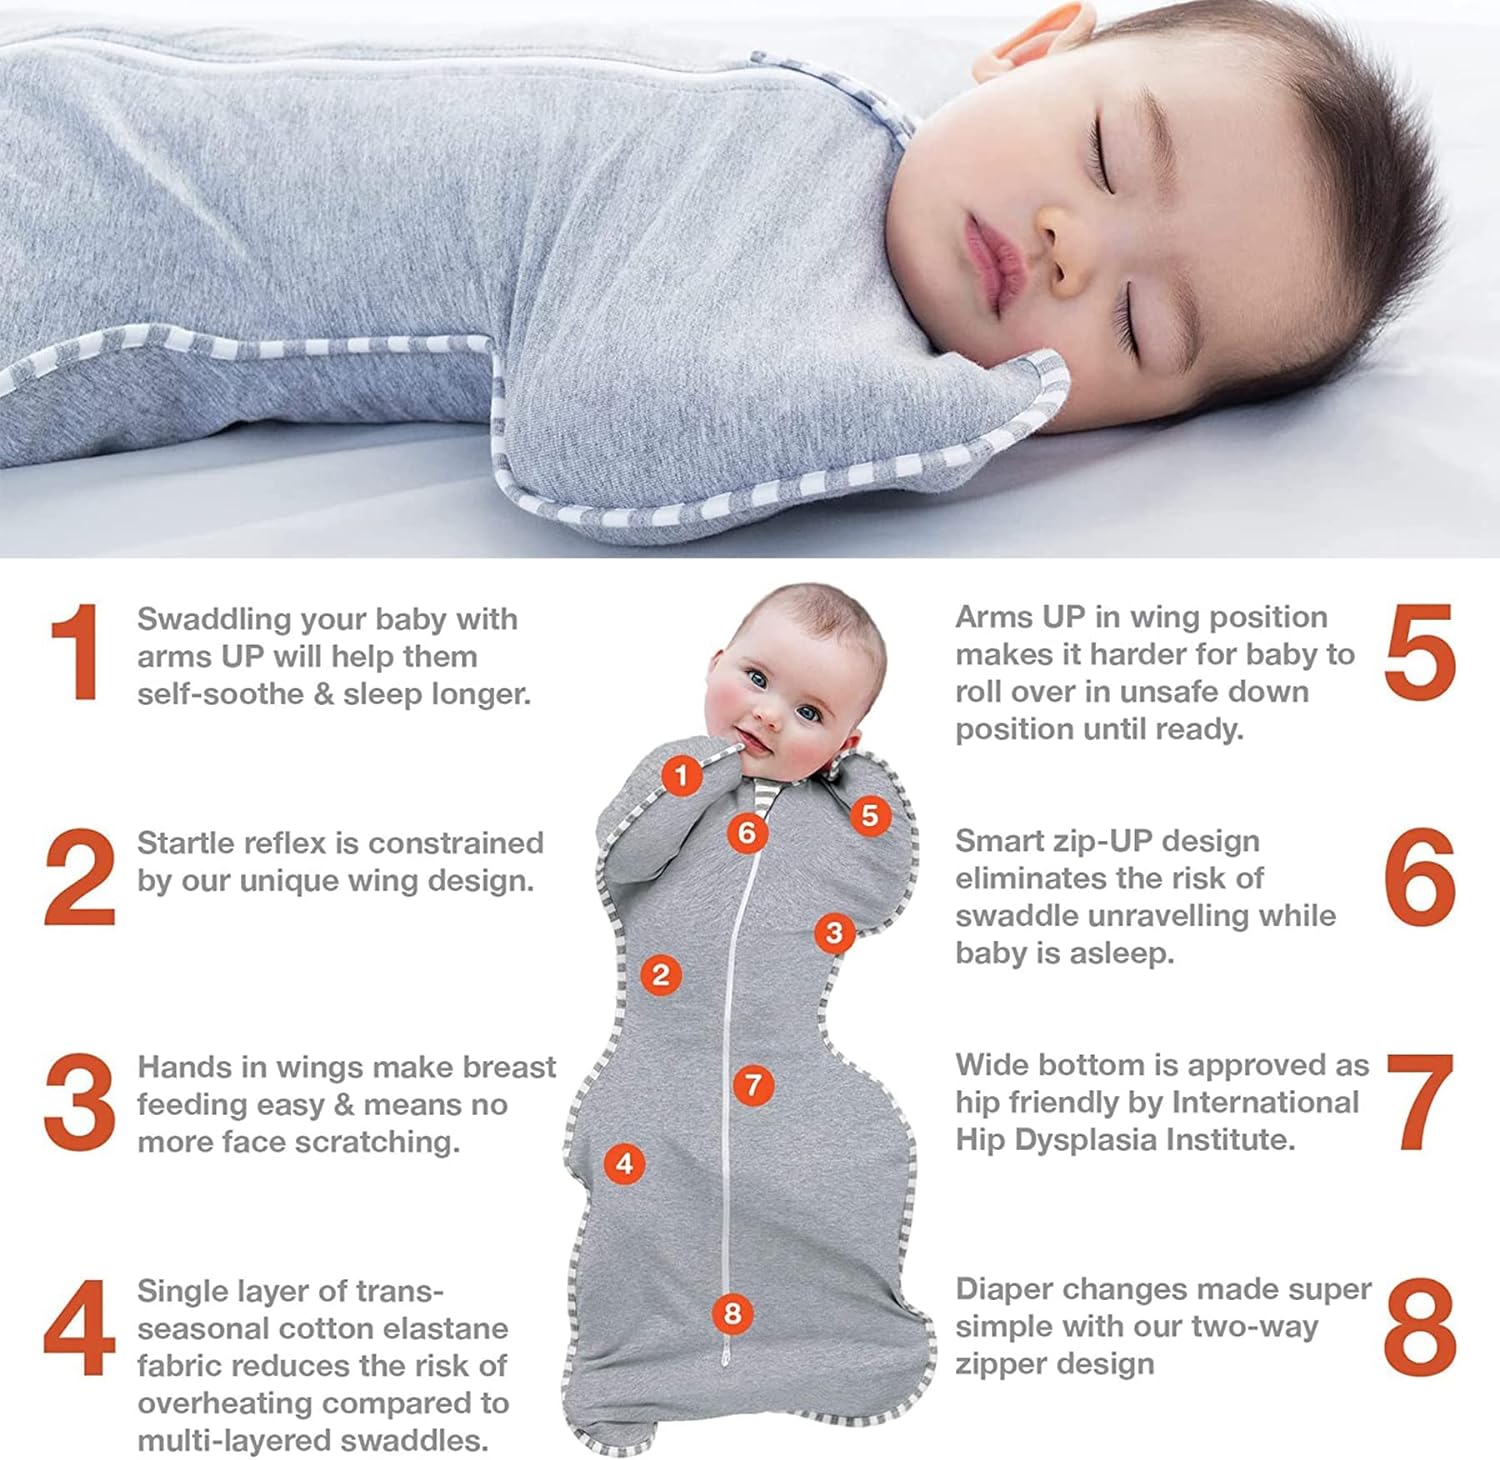 Baby Swaddle Wrap Swaddle Blanket For 0-3 Months Baby Girls And Boys Receiving Swaddling Wrap Boys Girls Ultra-Soft Newborn Sleeping Wraps for Infant Baby Gift - Grey